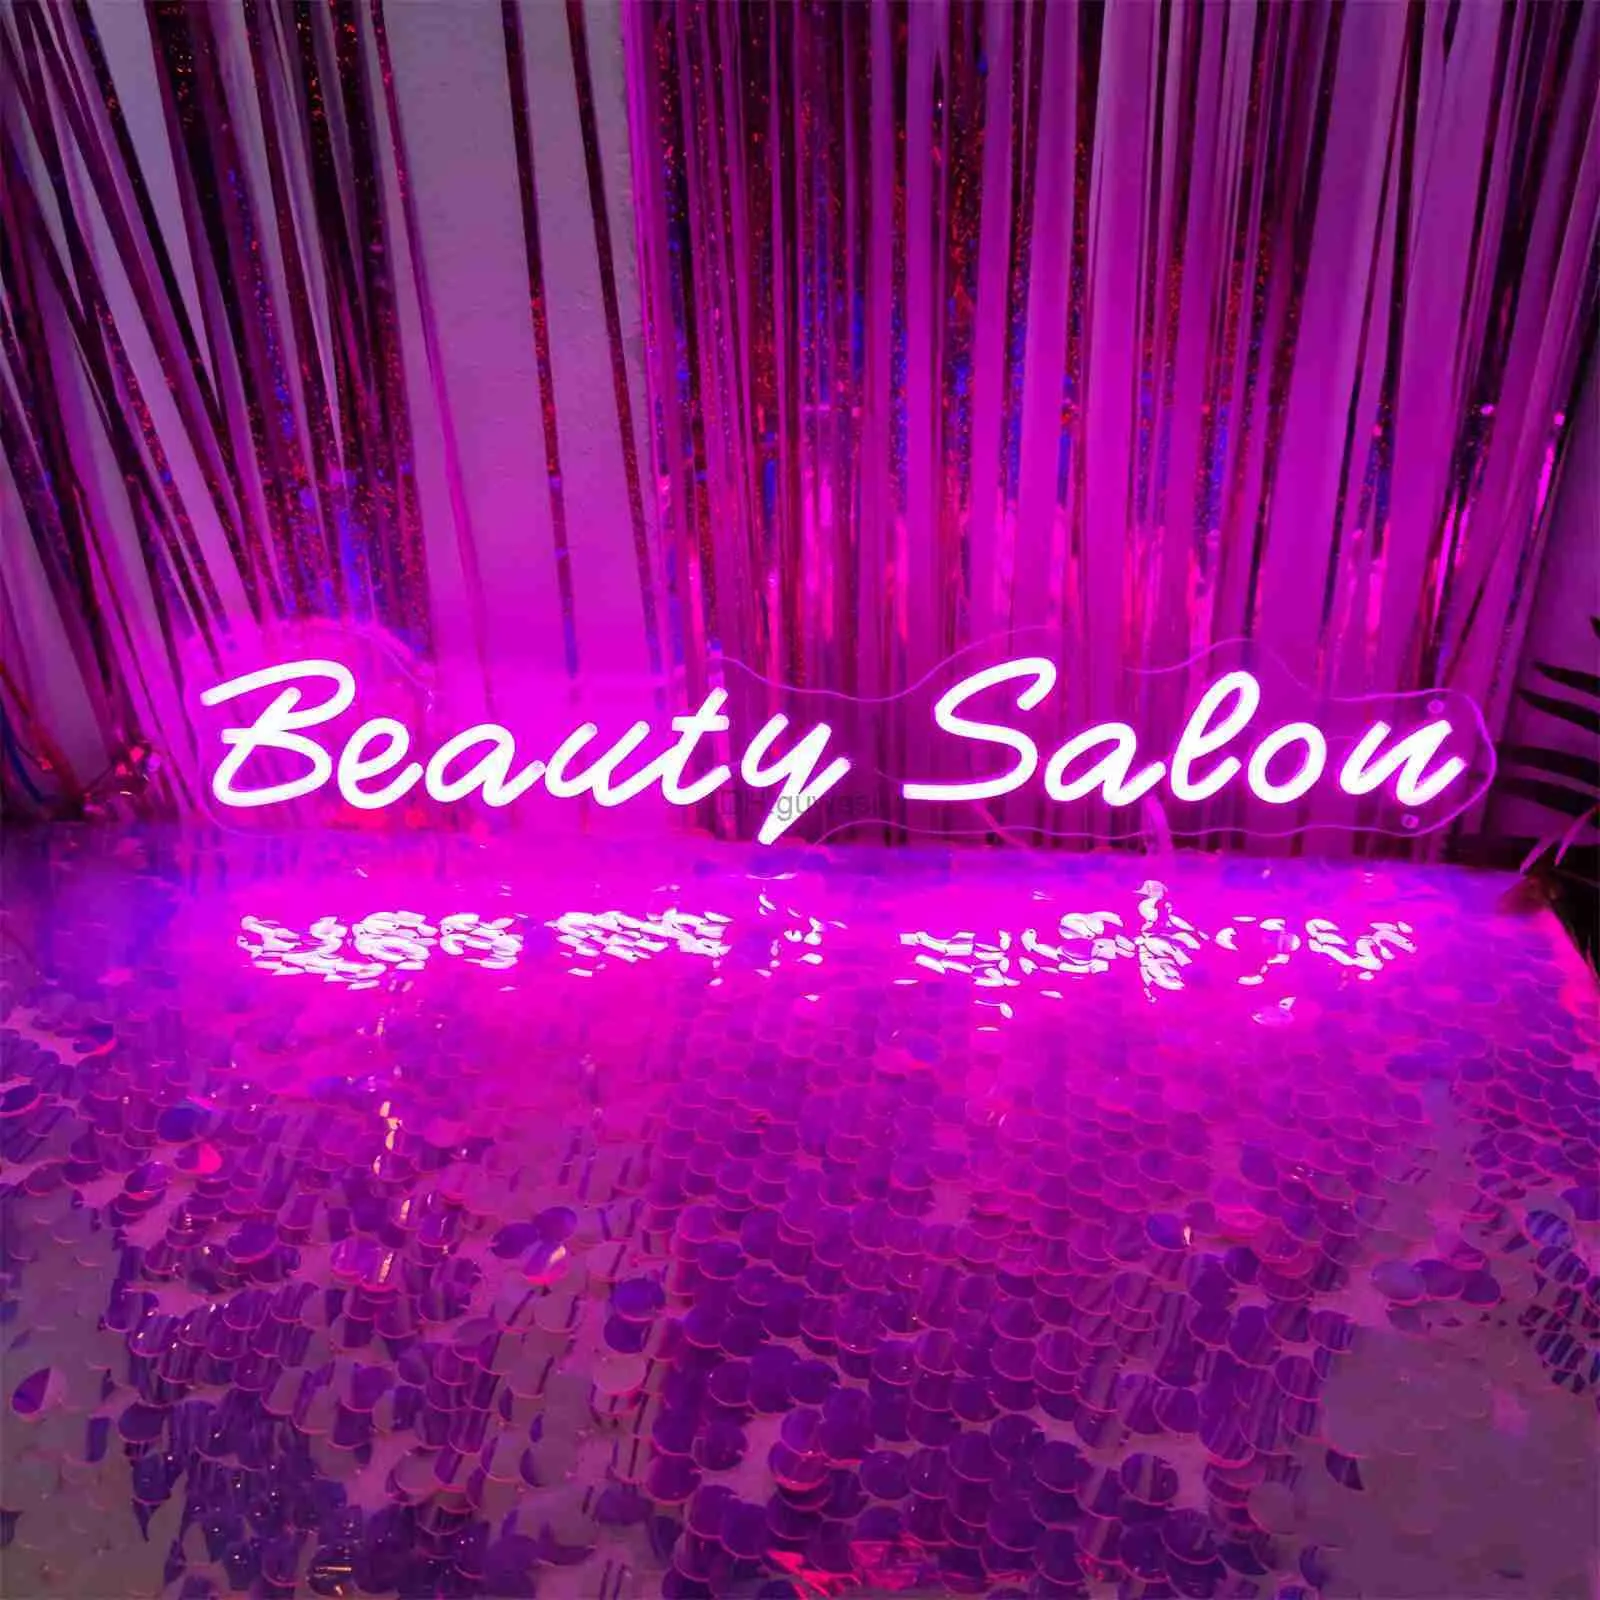 Led Neon Sign Beauty Salon Led Neon Lights Sign For Wall Room Decor Salon Studio Bedroom Decation Hanging Business Neon LED Signs Night Lamp YQ240126